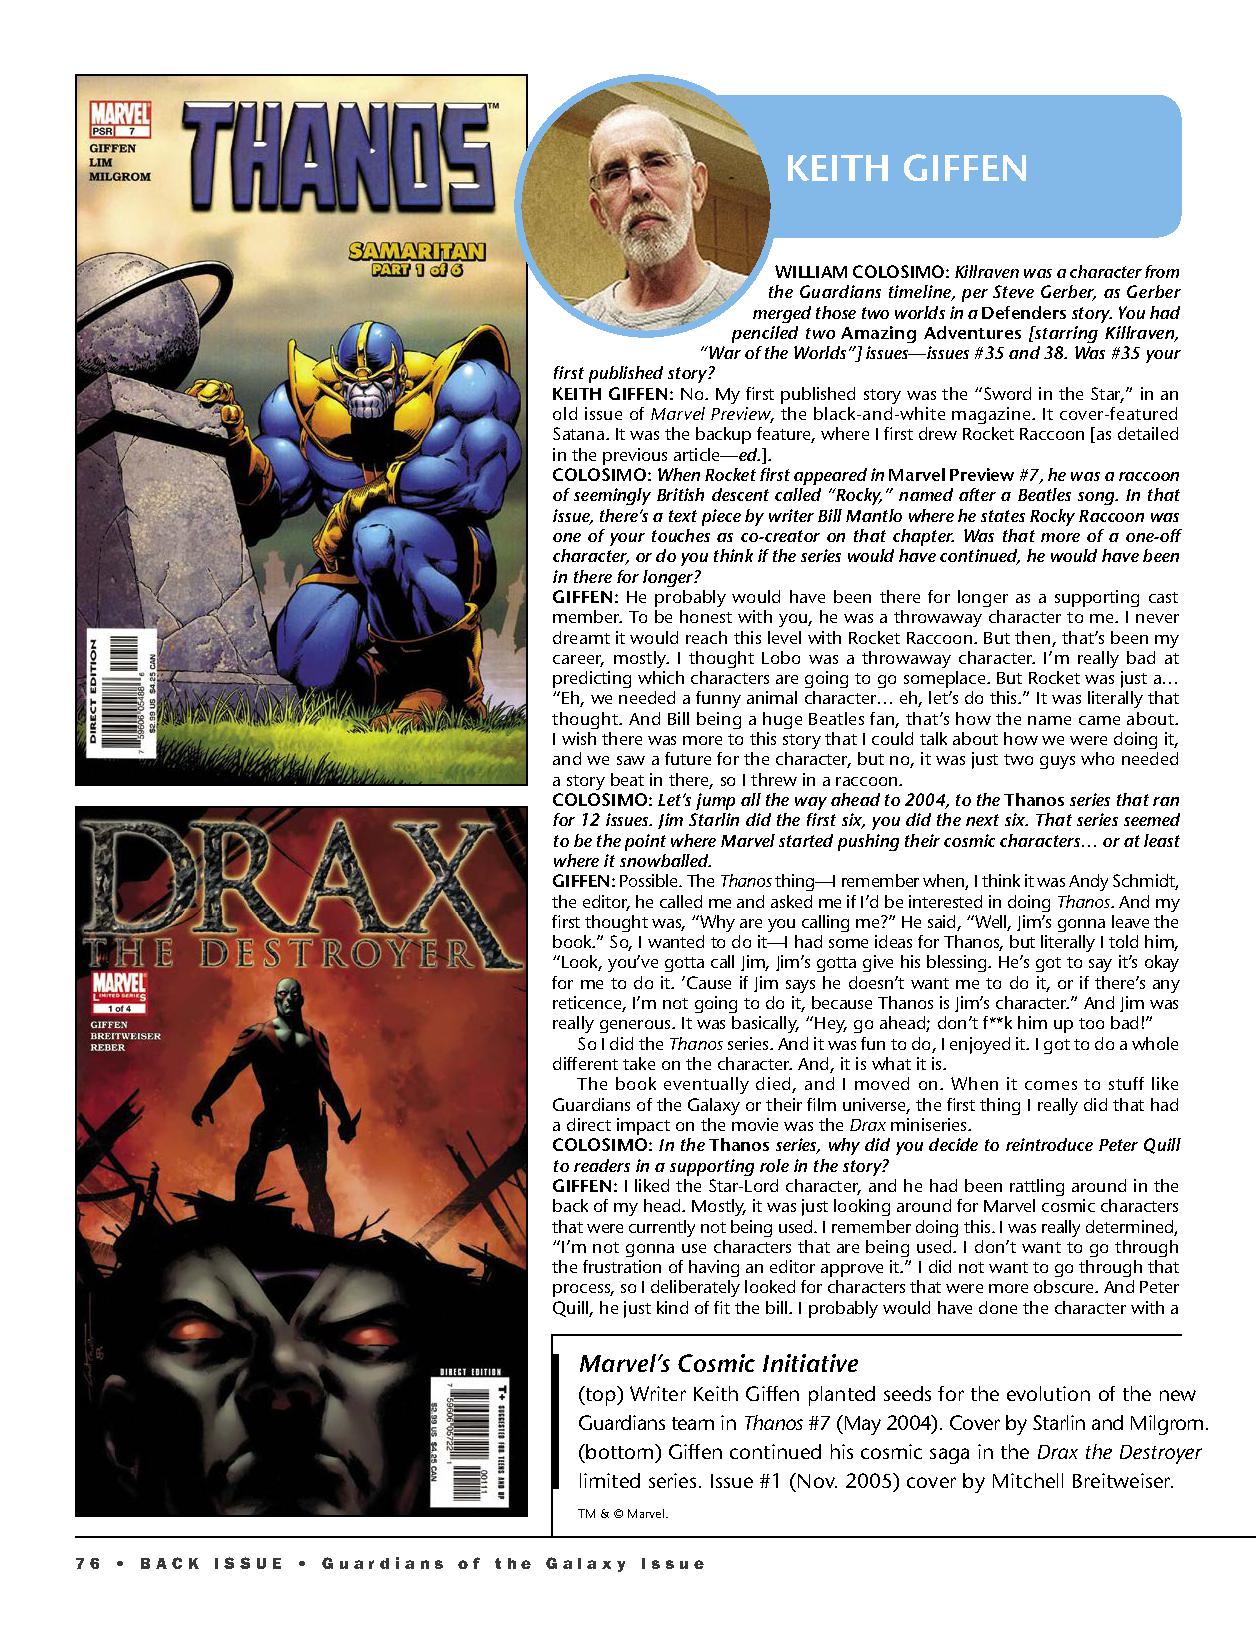 Read online Back Issue comic -  Issue #119 - 78